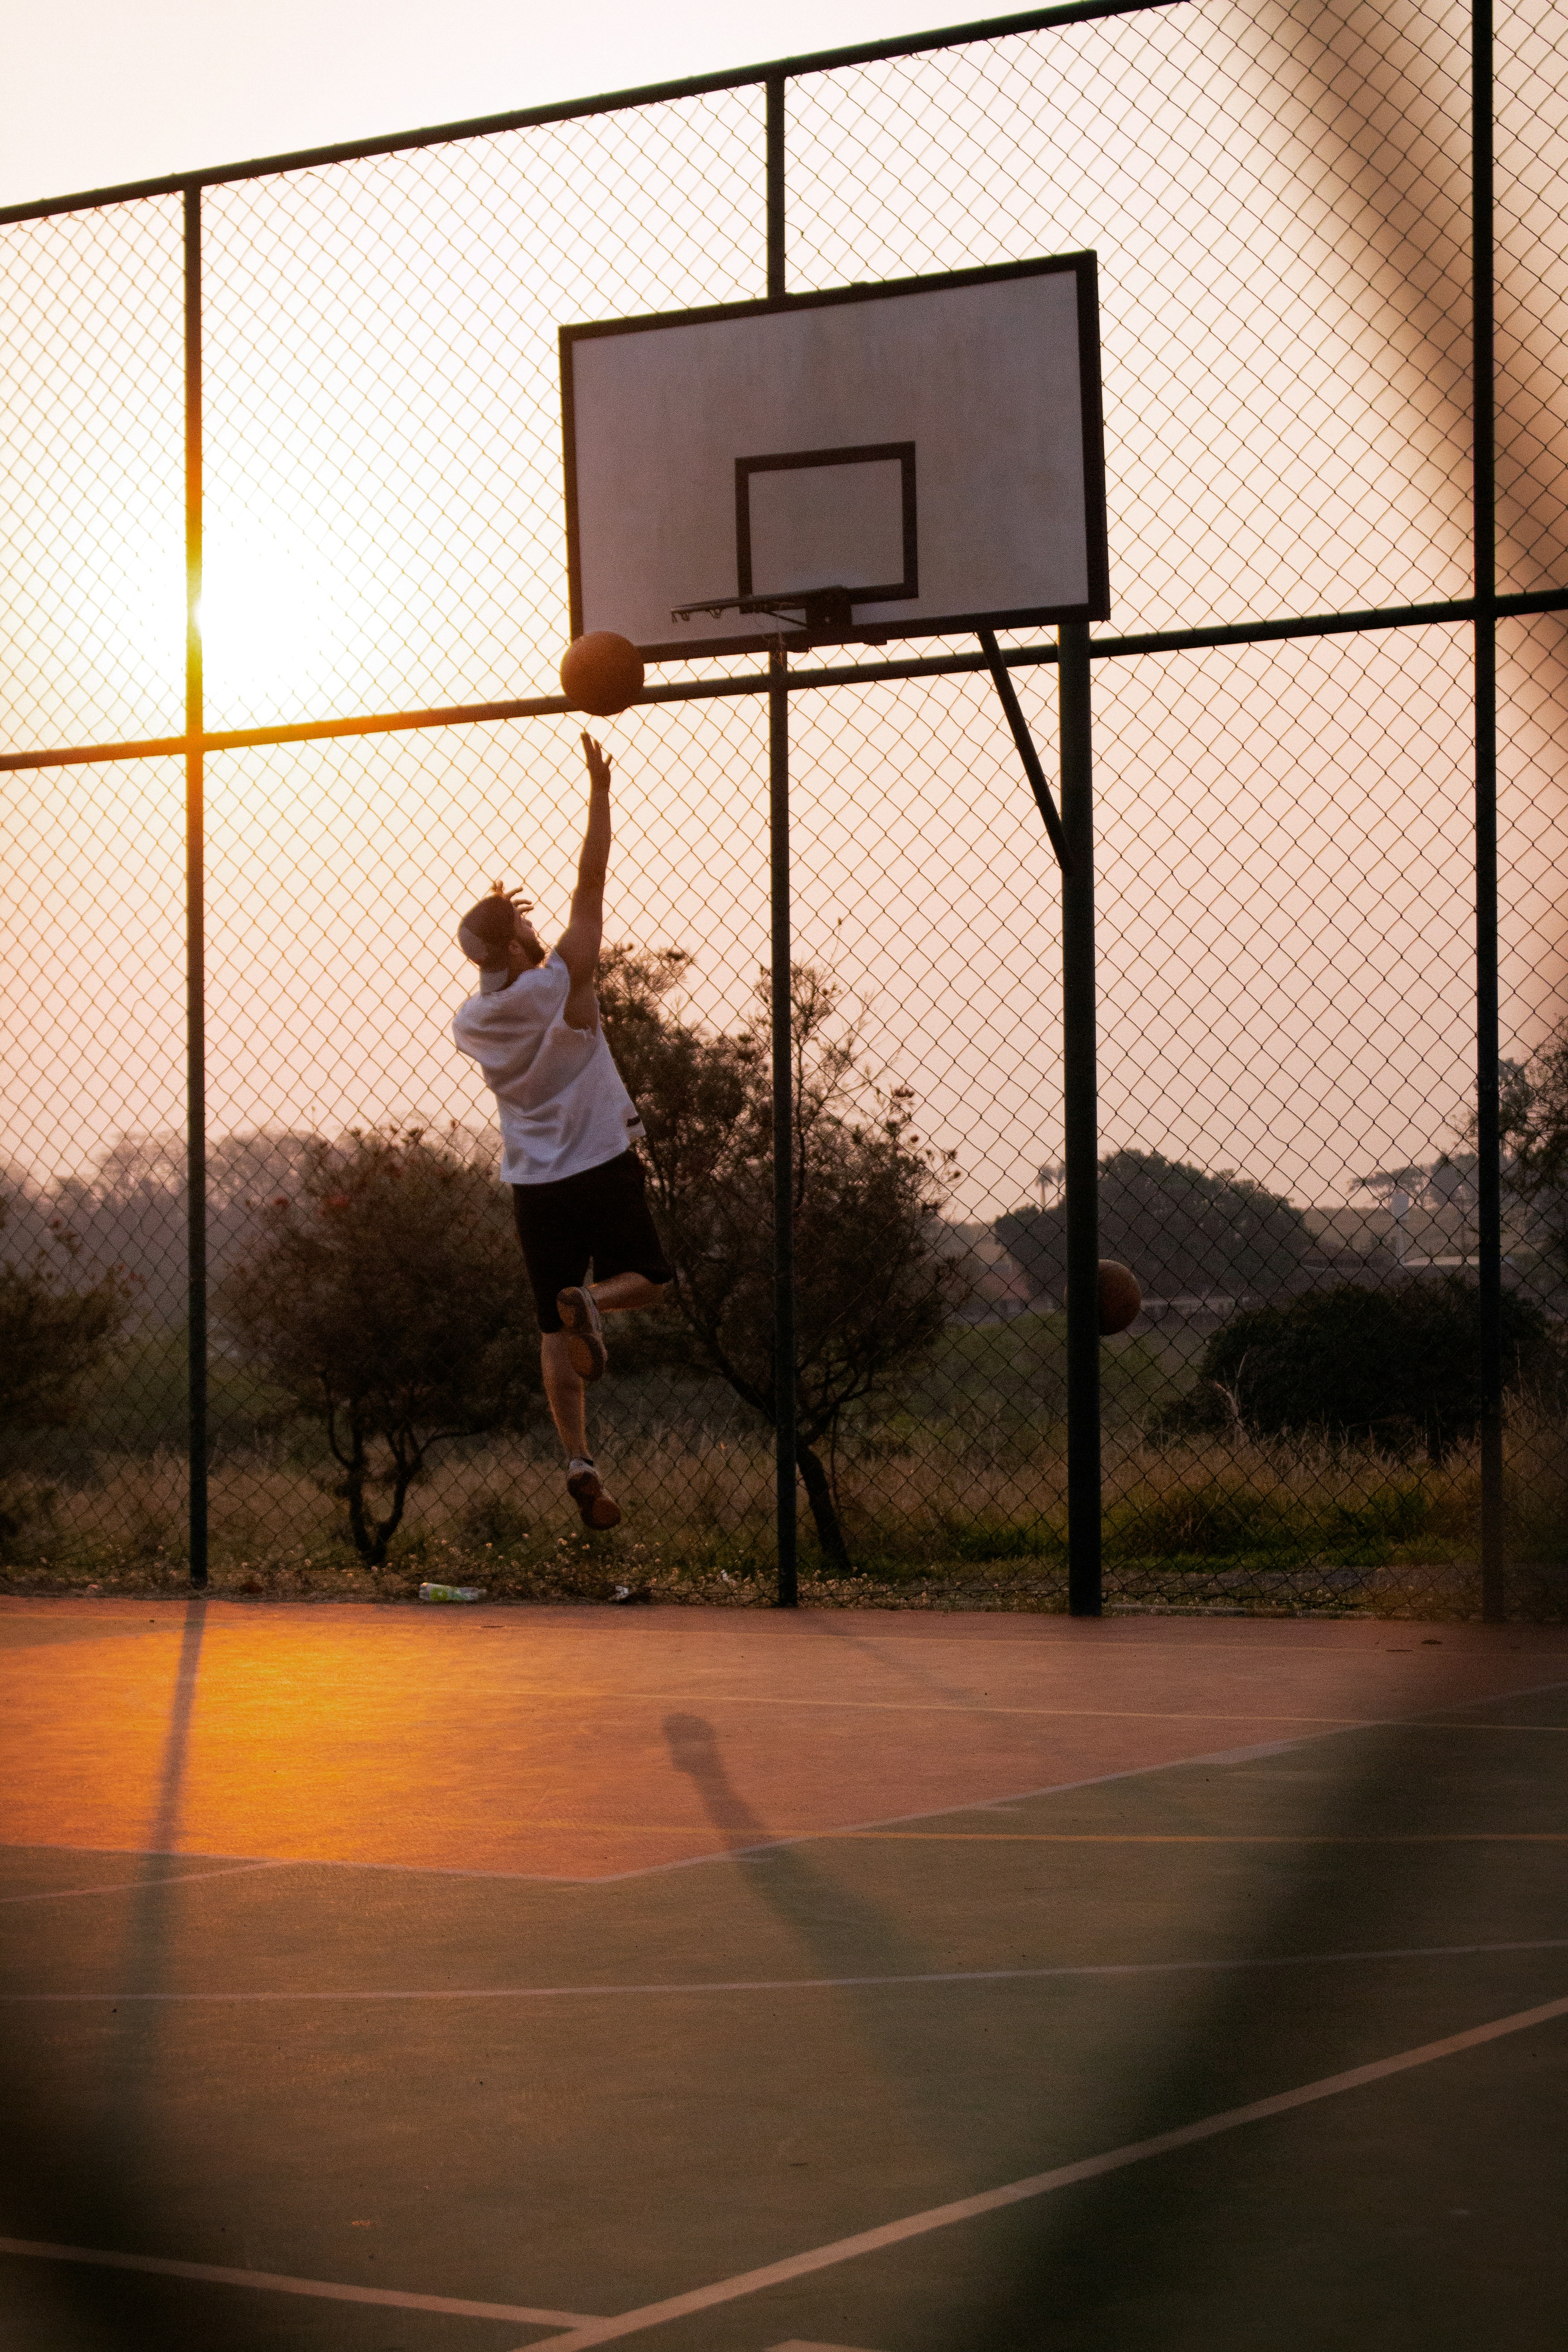 Choose from a curated selection of basketball photos. Always free on Unsplash.